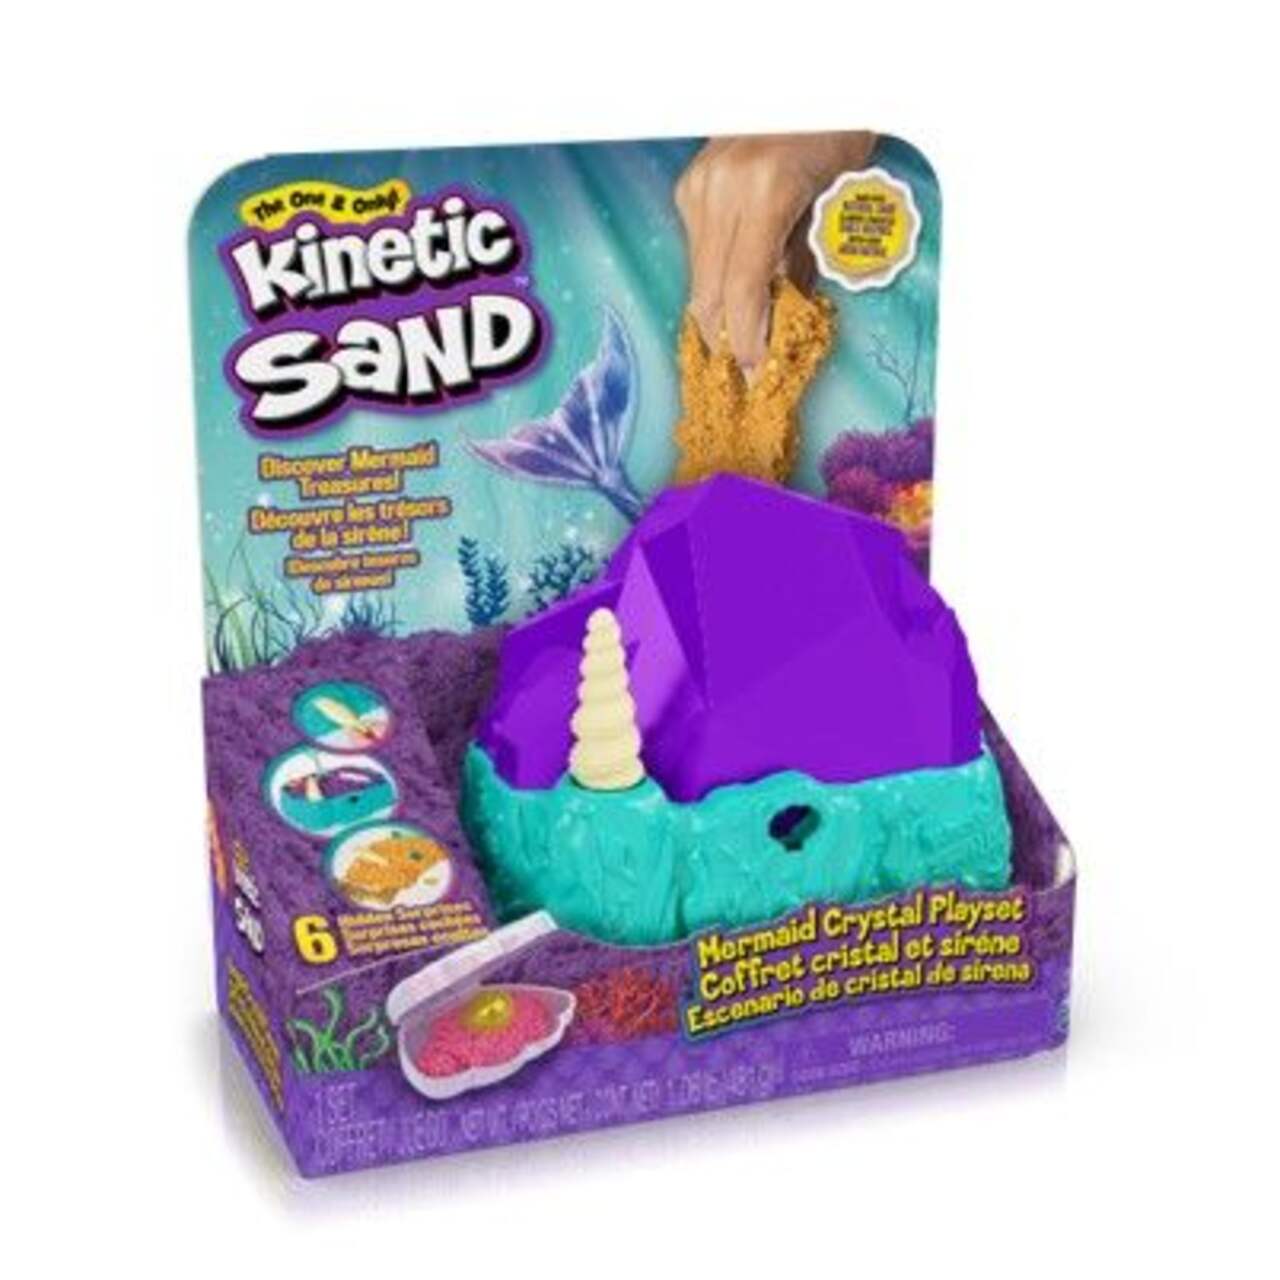 Kinetic Sand, Mermaid Crystal Playset, Over 1lb of Play Sand, Gold Shimmer  Sand, Storage and Tools, Sensory Toys for Kids Ages 3 and up